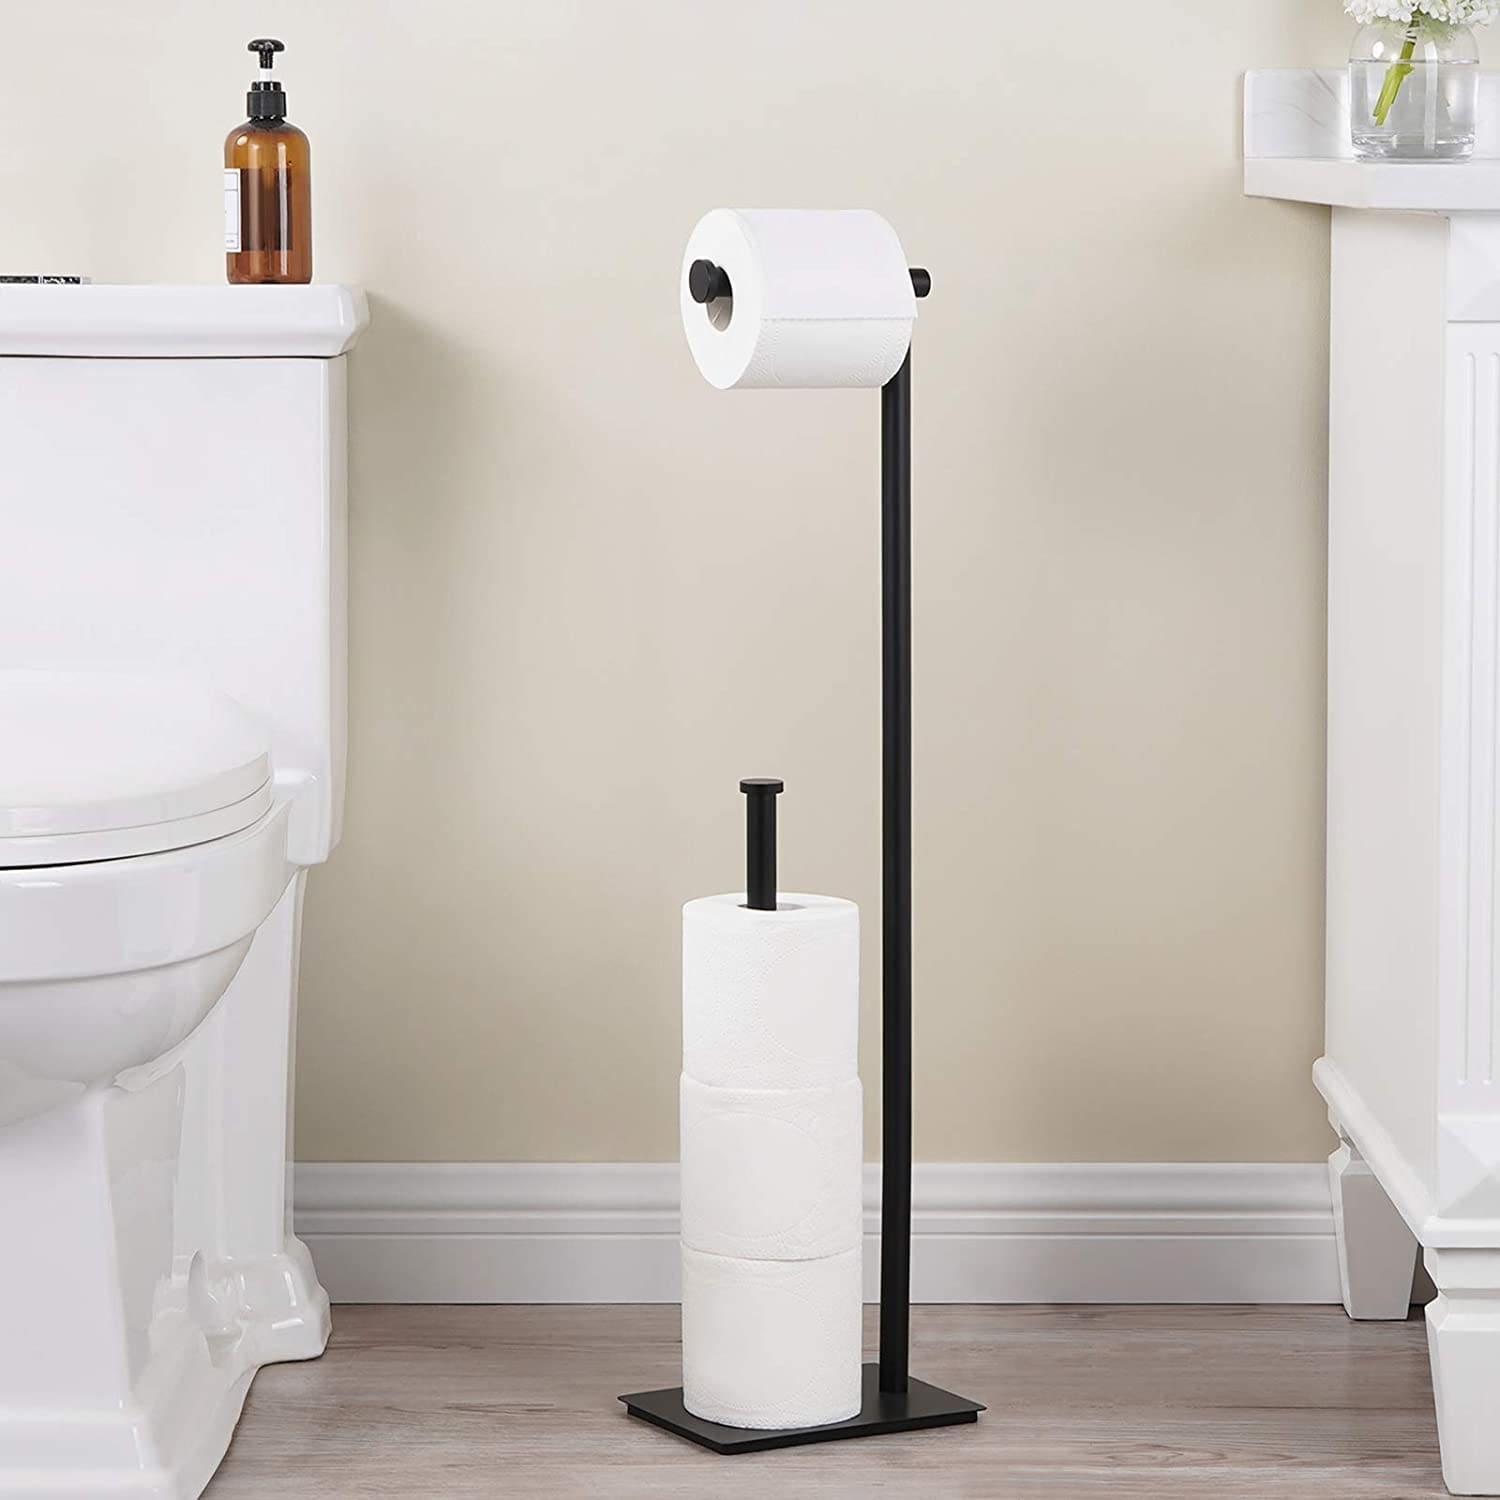 https://ak1.ostkcdn.com/images/products/is/images/direct/ee0fb7d007b08ad327d7445115e611de2e8a381e/29%22-Height-Freestanding-Toilet-Paper-Holder-with-Reserve.jpg